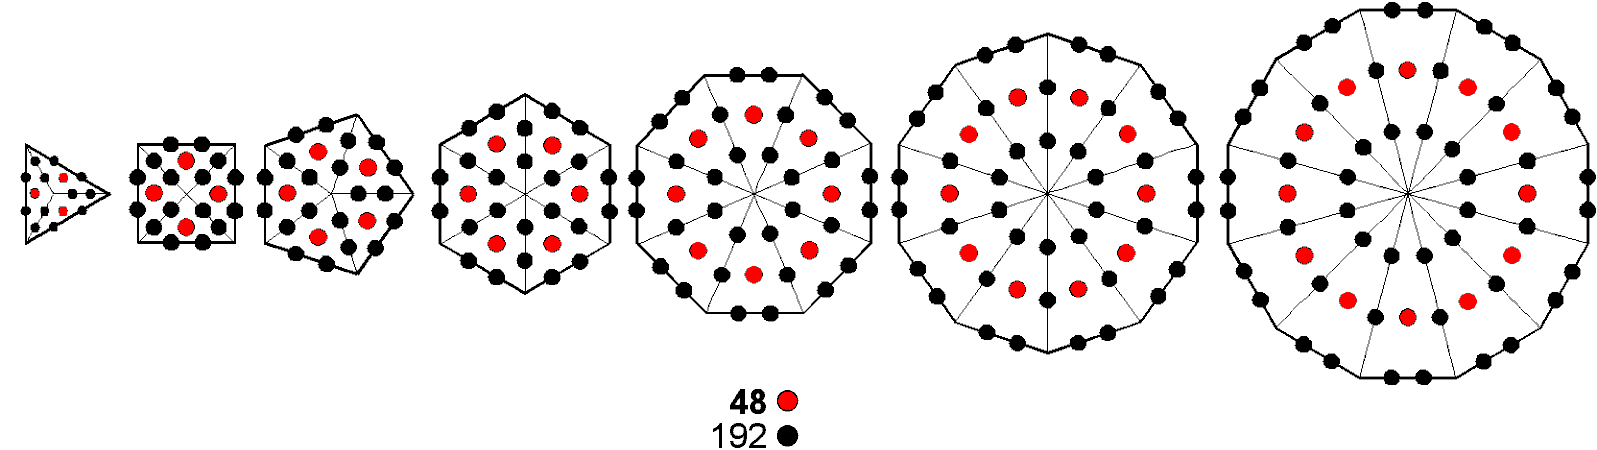 (48+192) hexagonal yods in 7 separate polygons